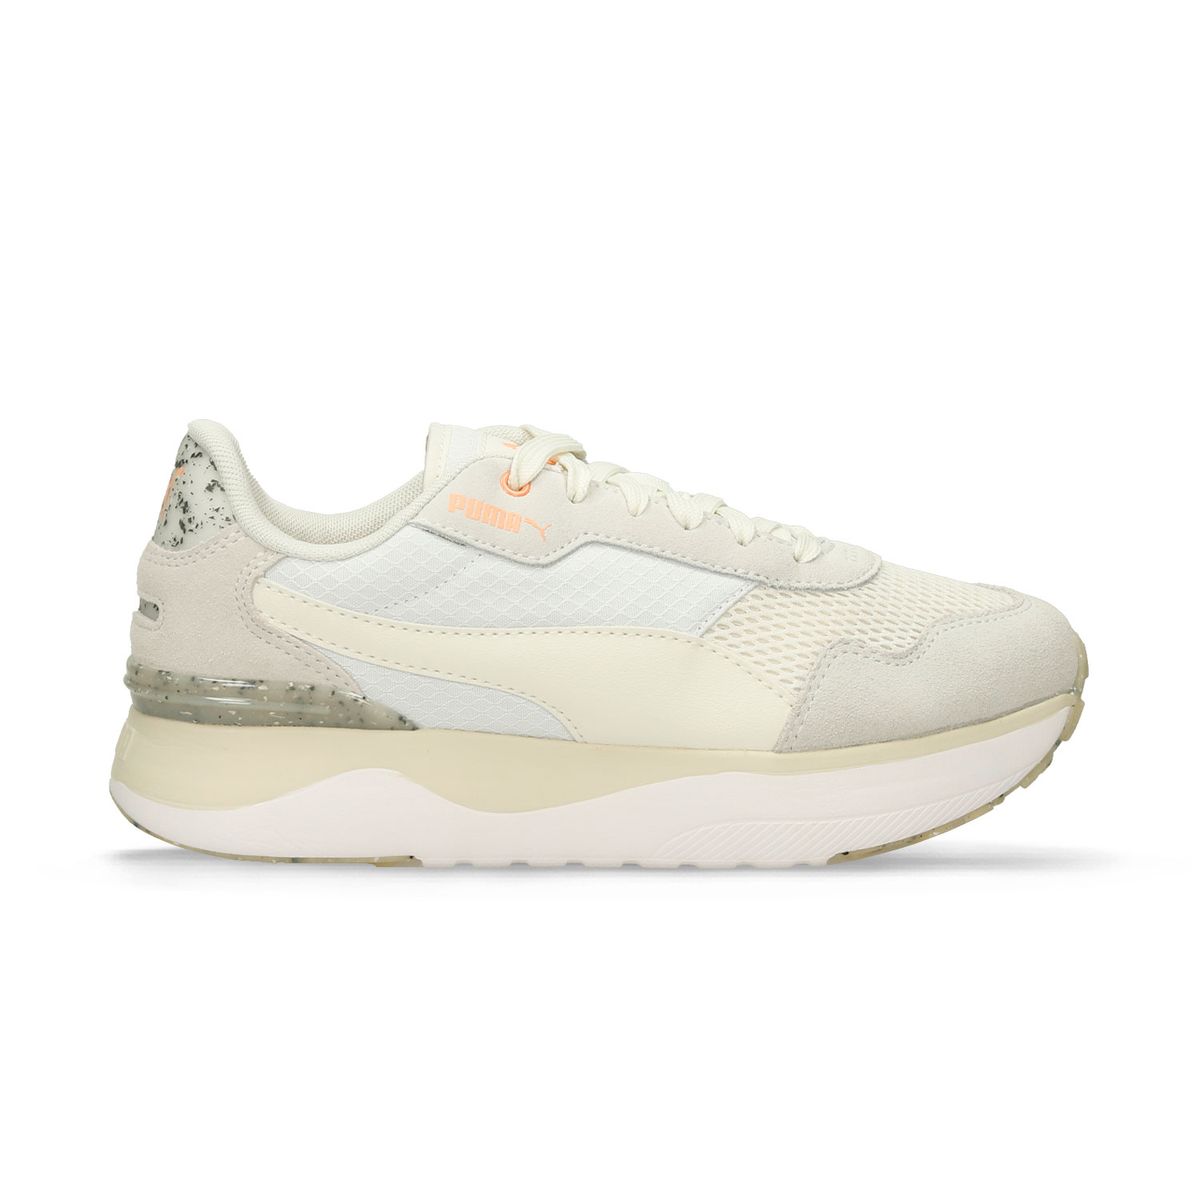 Tenis Casuales Gris Puma R78 Voyage Better Wns Mujer